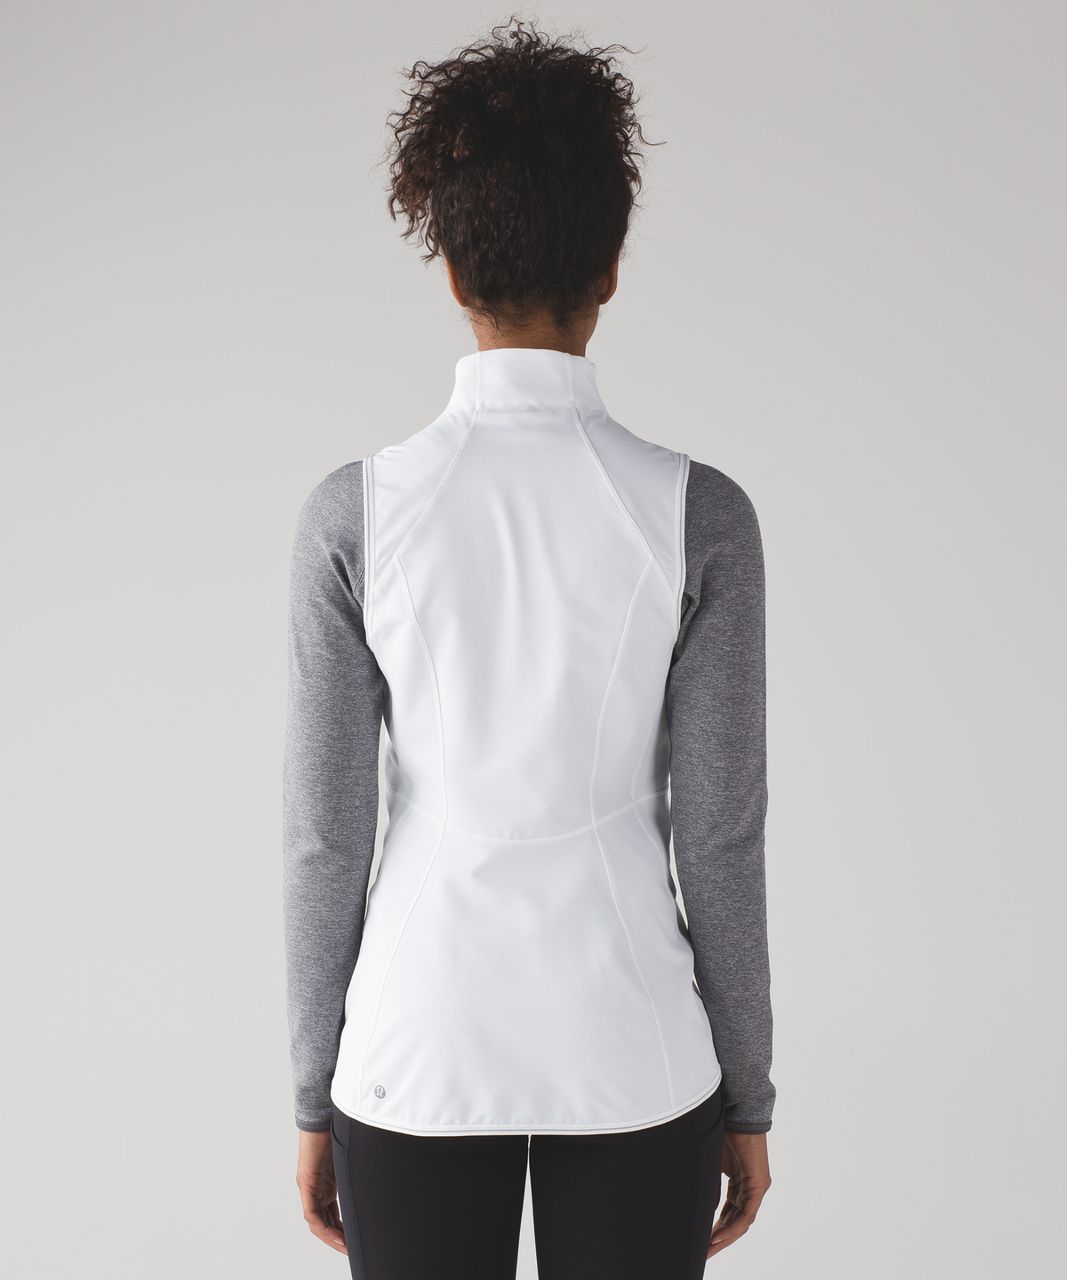 Lululemon Hill And Valley Vest - White